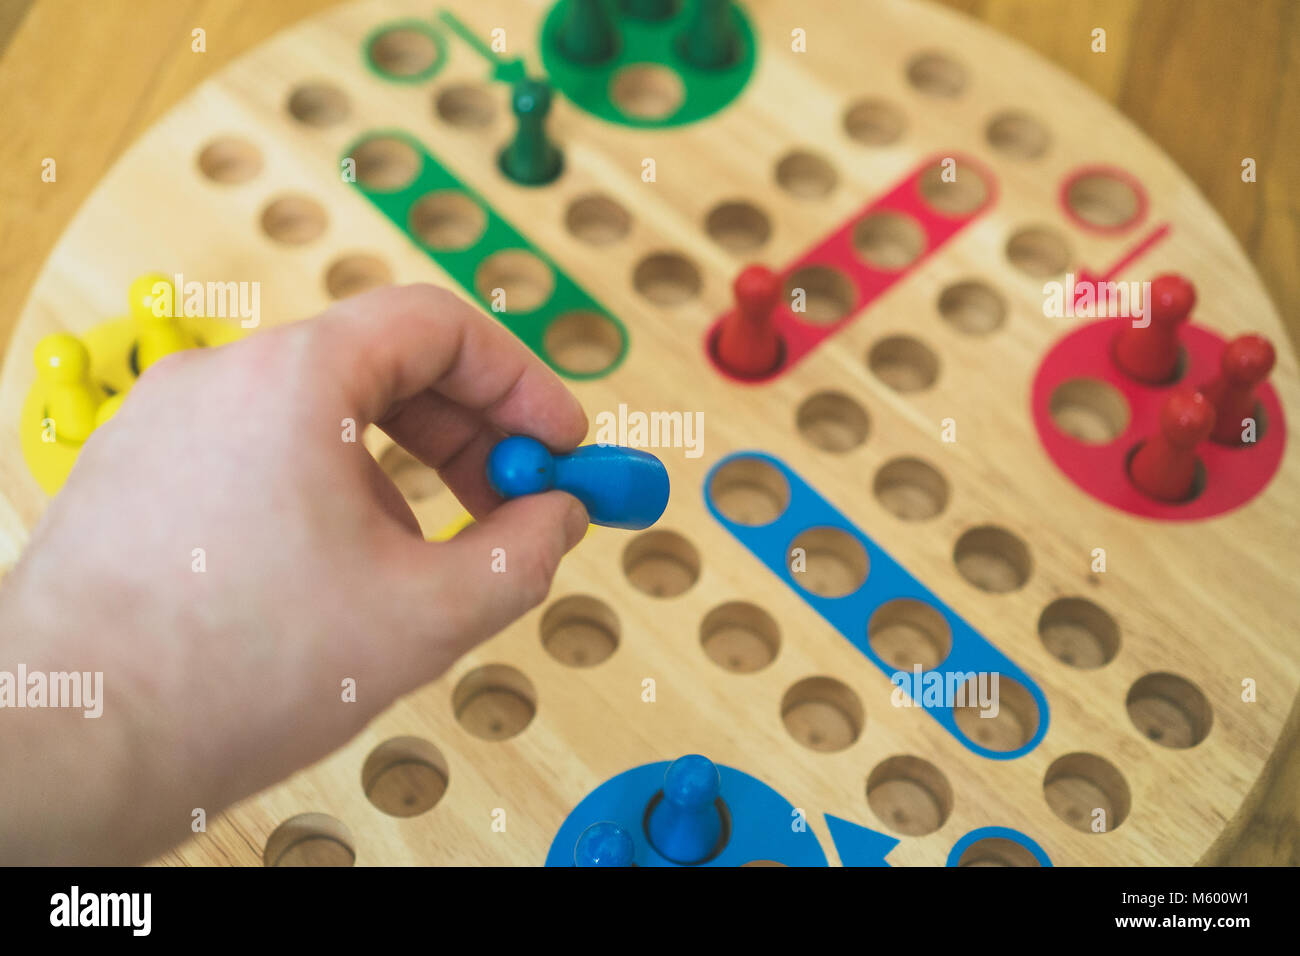 Man playing Ludo board game. Close-up view. Stock Photo